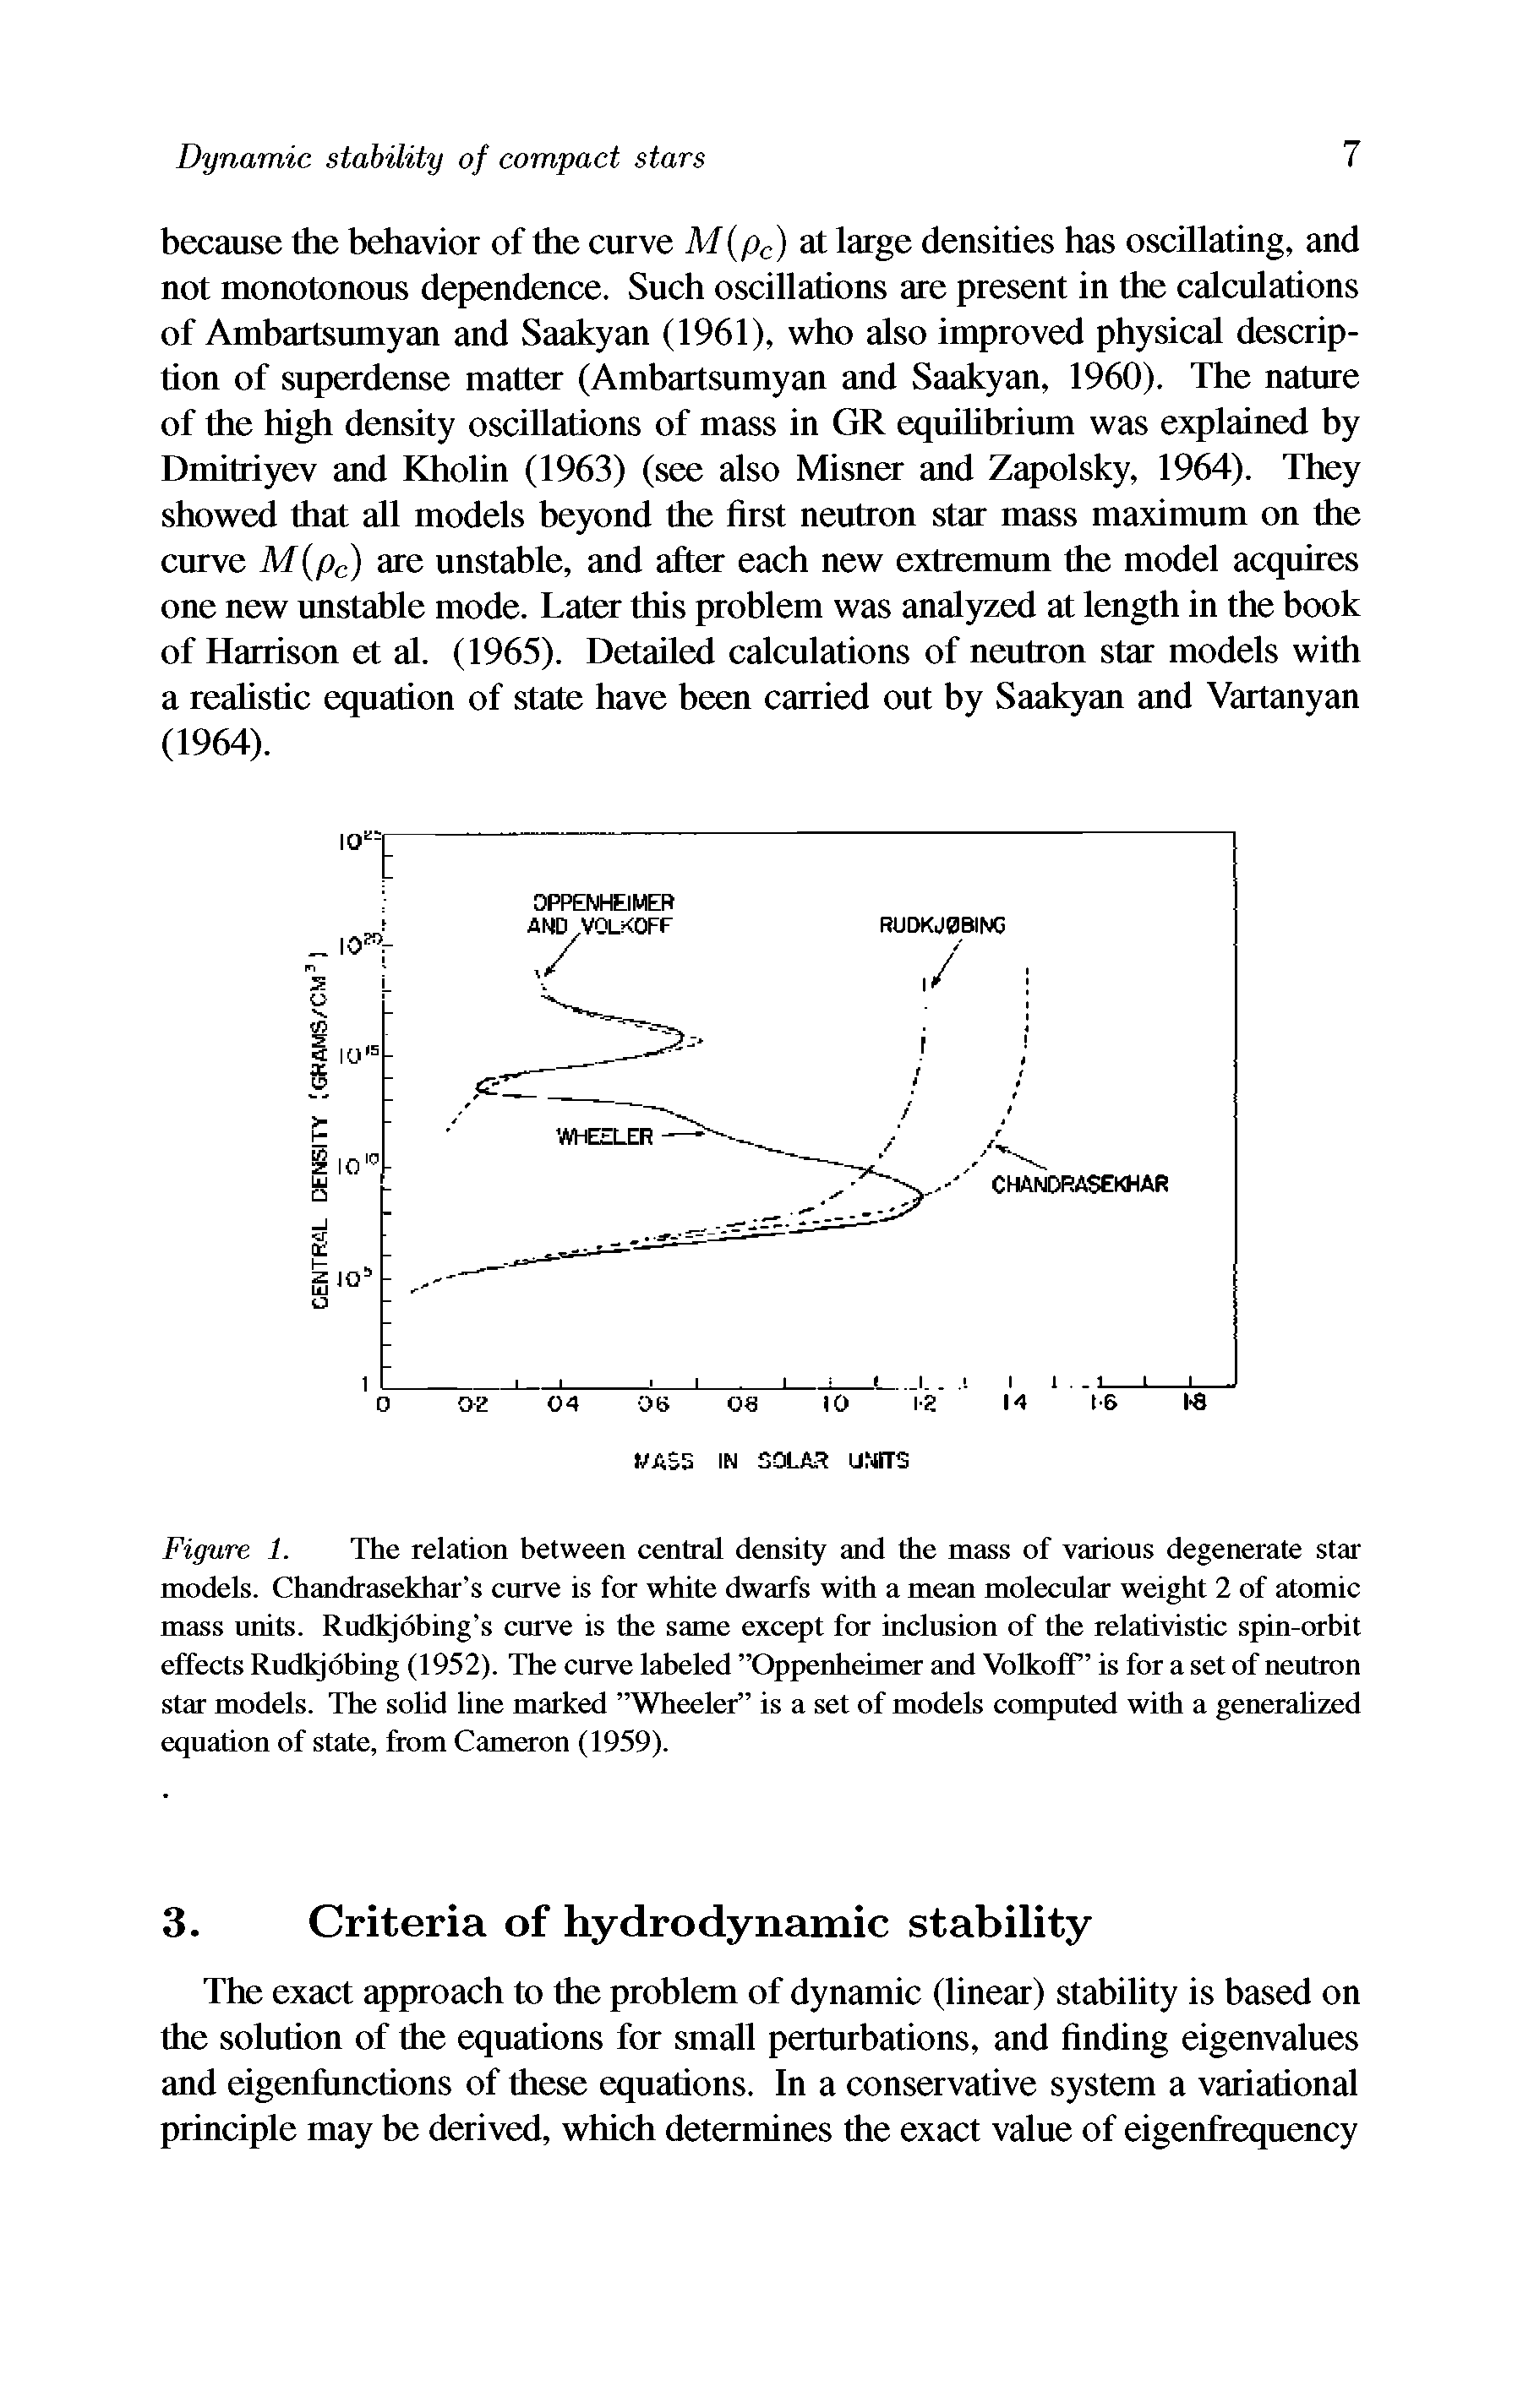 Figure 1. The relation between central density and the mass of various degenerate star models. Chandrasekhar s curve is for white dwarfs with a mean molecular weight 2 of atomic mass units. Rudkjobing s curve is the same except for inclusion of the relativistic spin-orbit effects Rudkjobing (1952). The curve labeled Oppenheimer and Volkoff is for a set of neutron star models. The solid line marked Wheeler is a set of models computed with a generalized equation of state, from Cameron (1959).